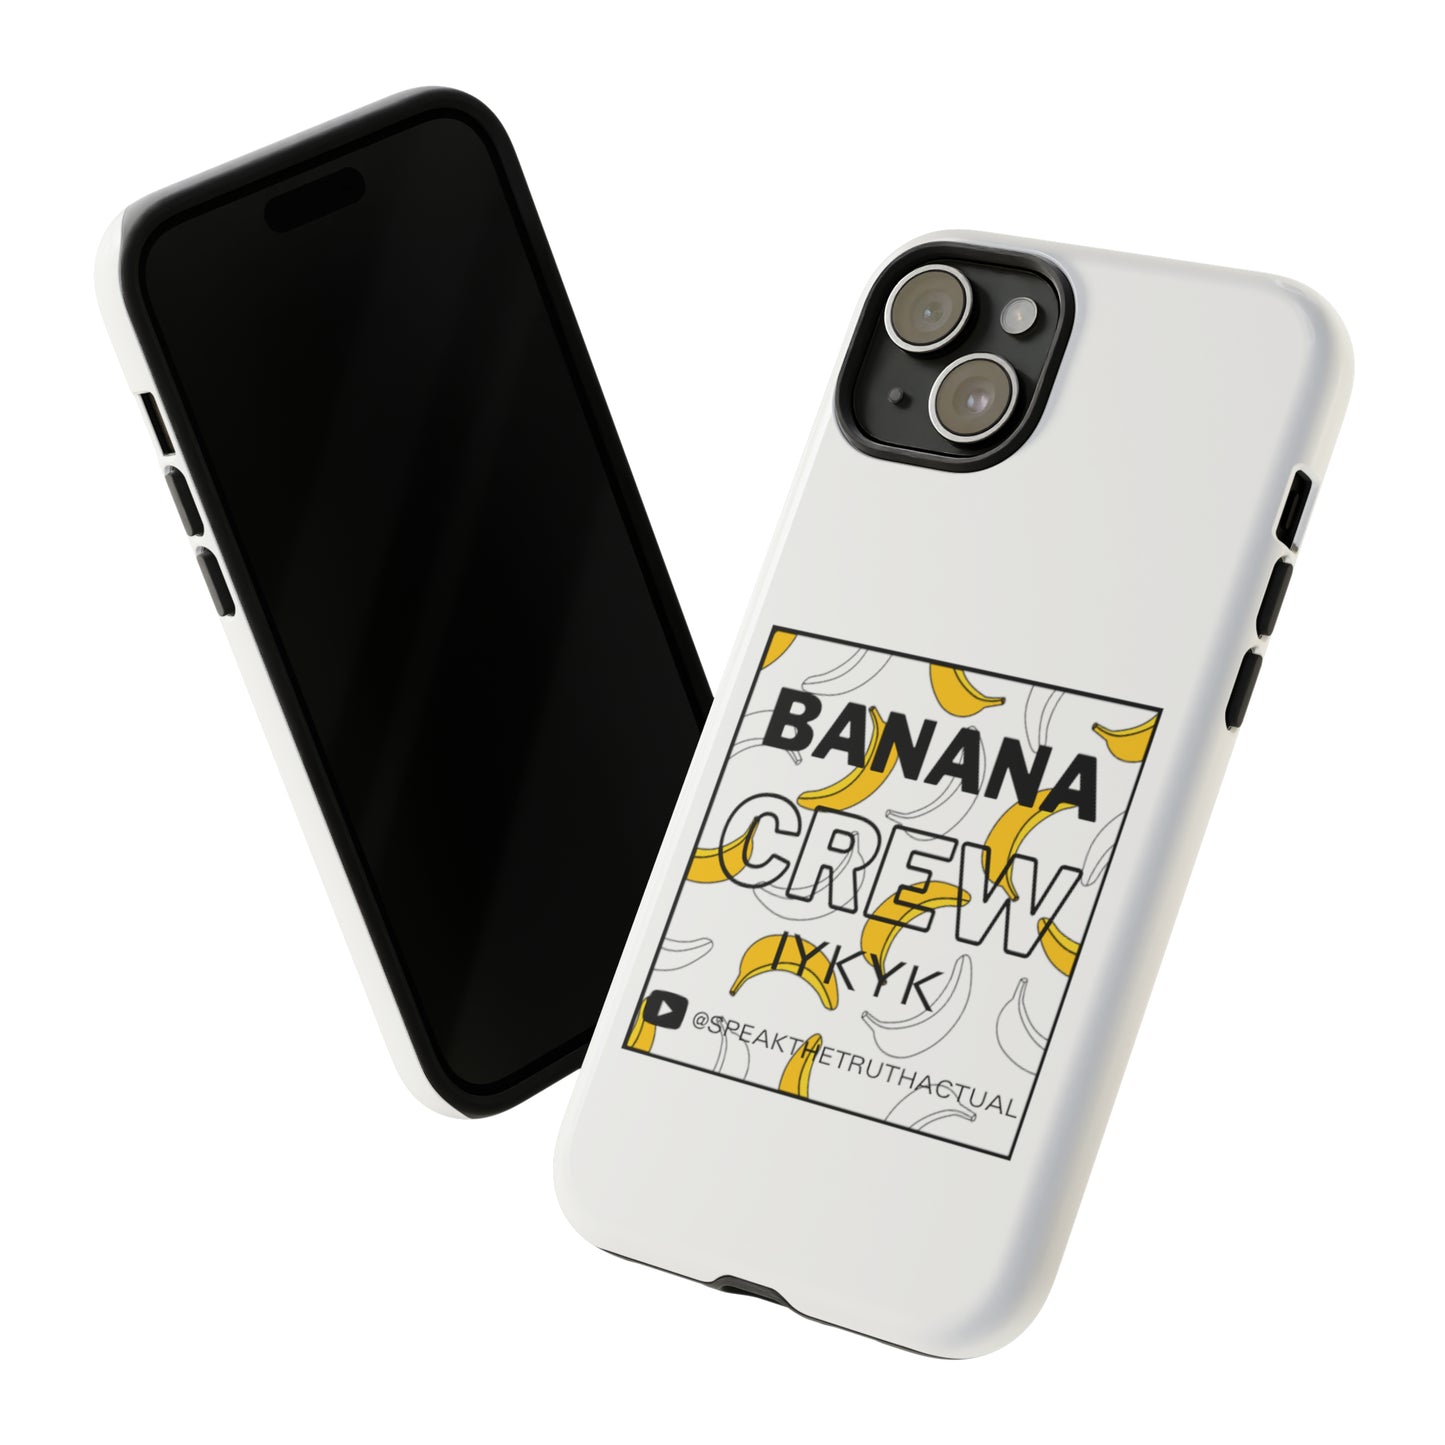 Banana Crew Tough Cases - Multiple Phone Options Available